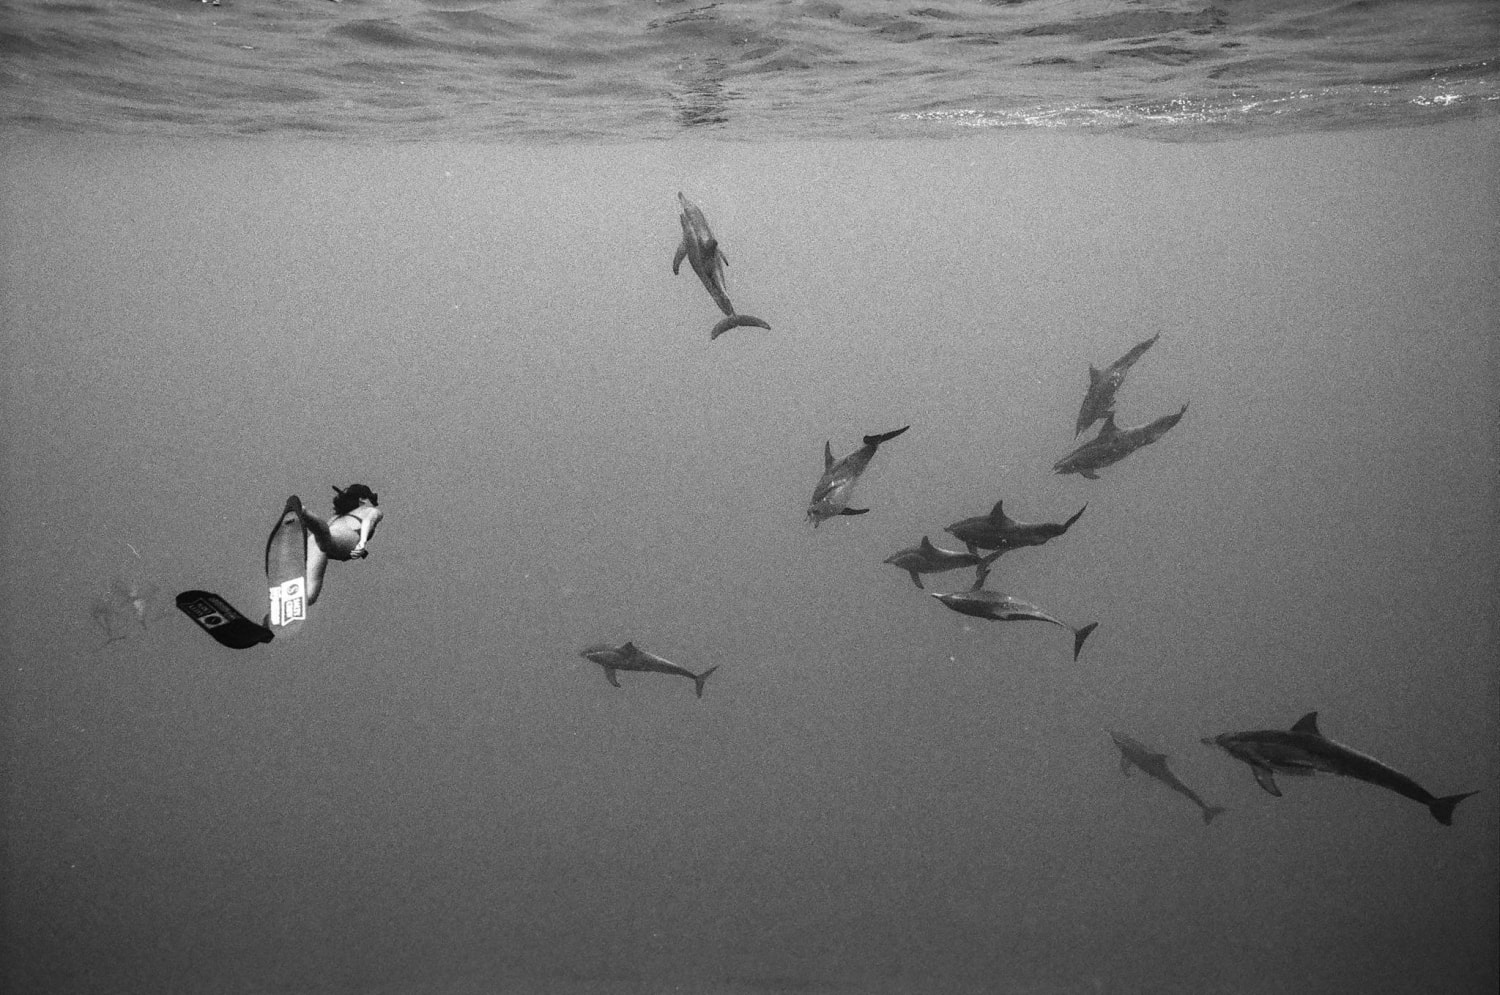 We were miles offshore when we saw fins in the water. Turned out to be a pod of rough tooth dolphins, and they were swimming with such wild crazy energy - one of my favorite things I have seen out there! Nikonos v / hp5.